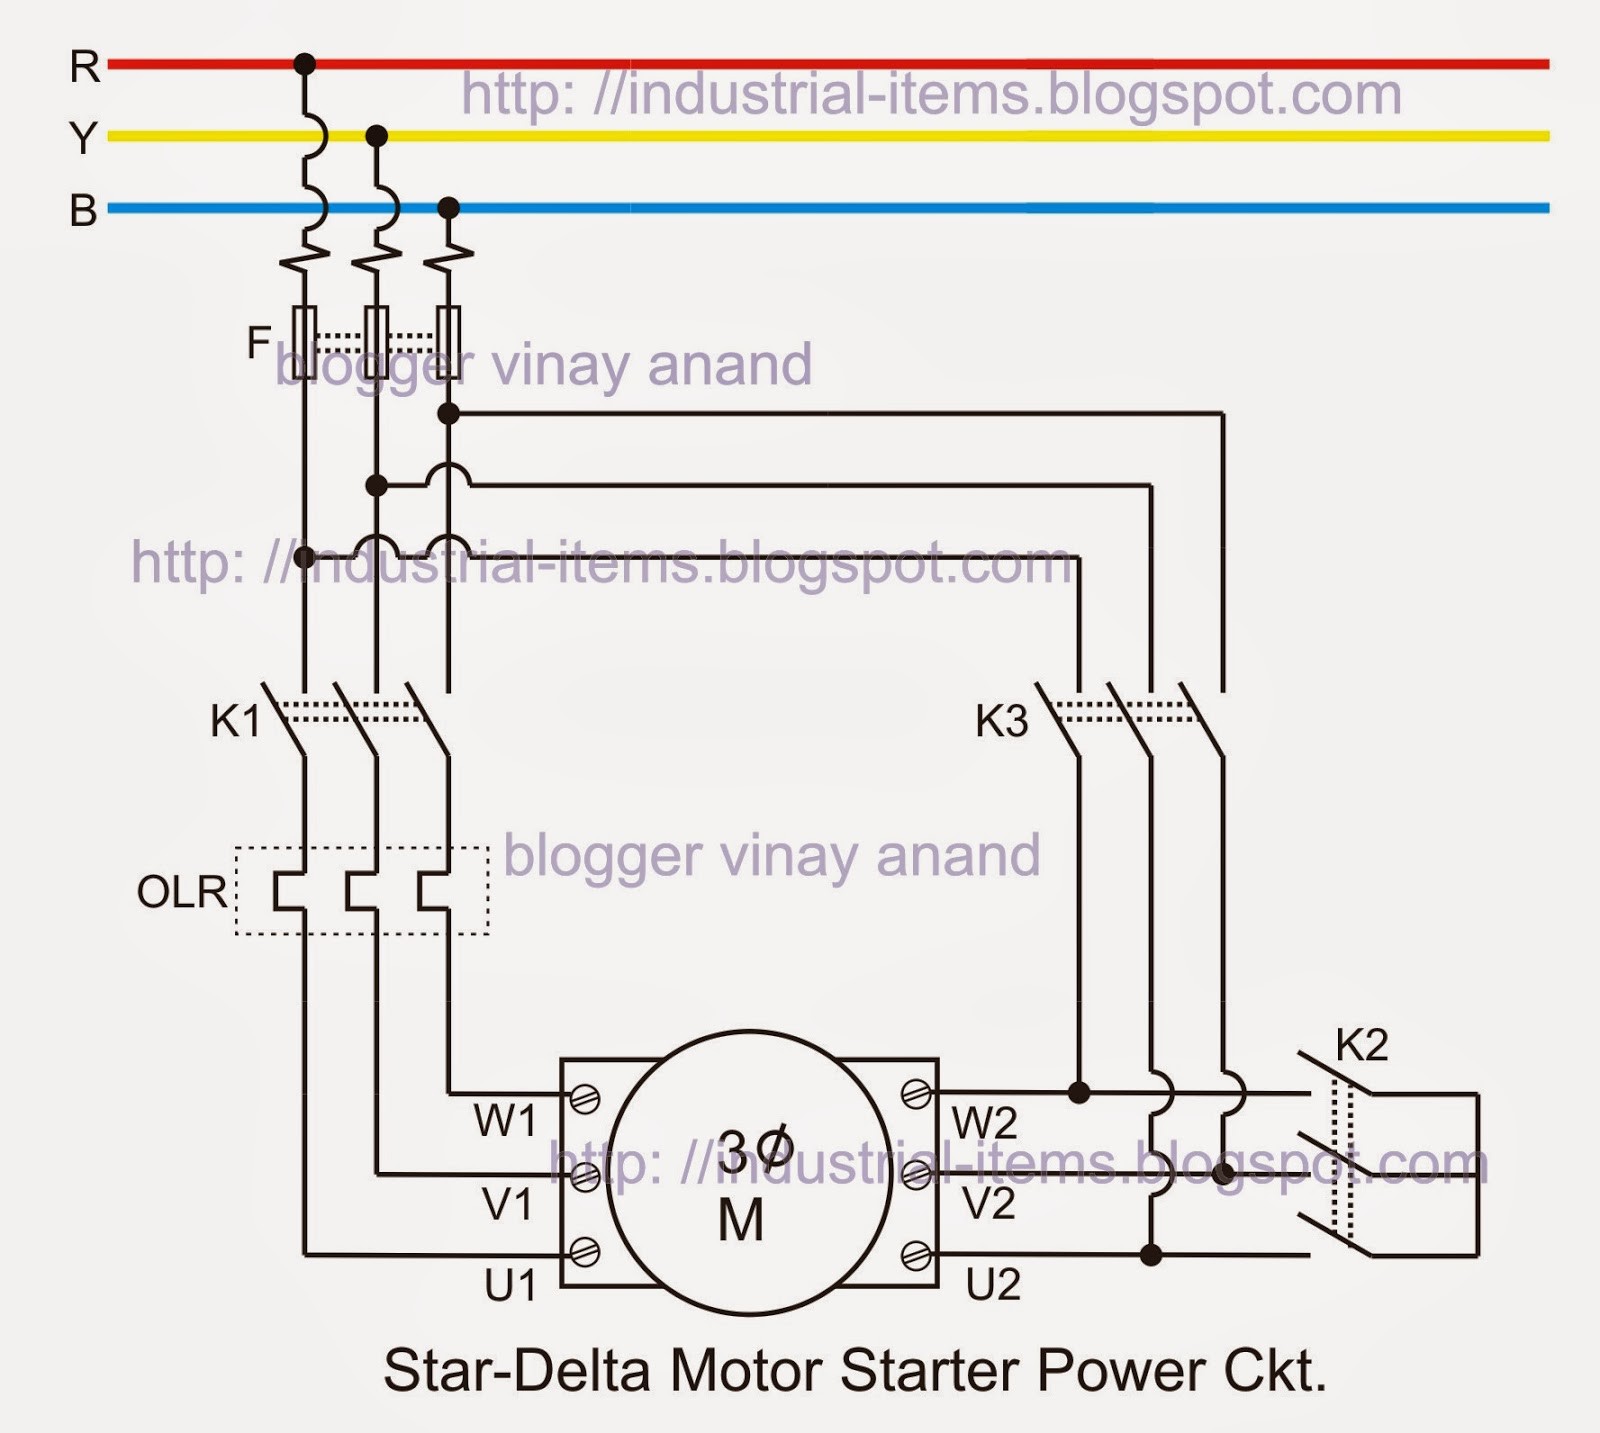 Tutorials Articles Star Delta Starter Theory Power Circuit Phase Induction Motor single phase reversing